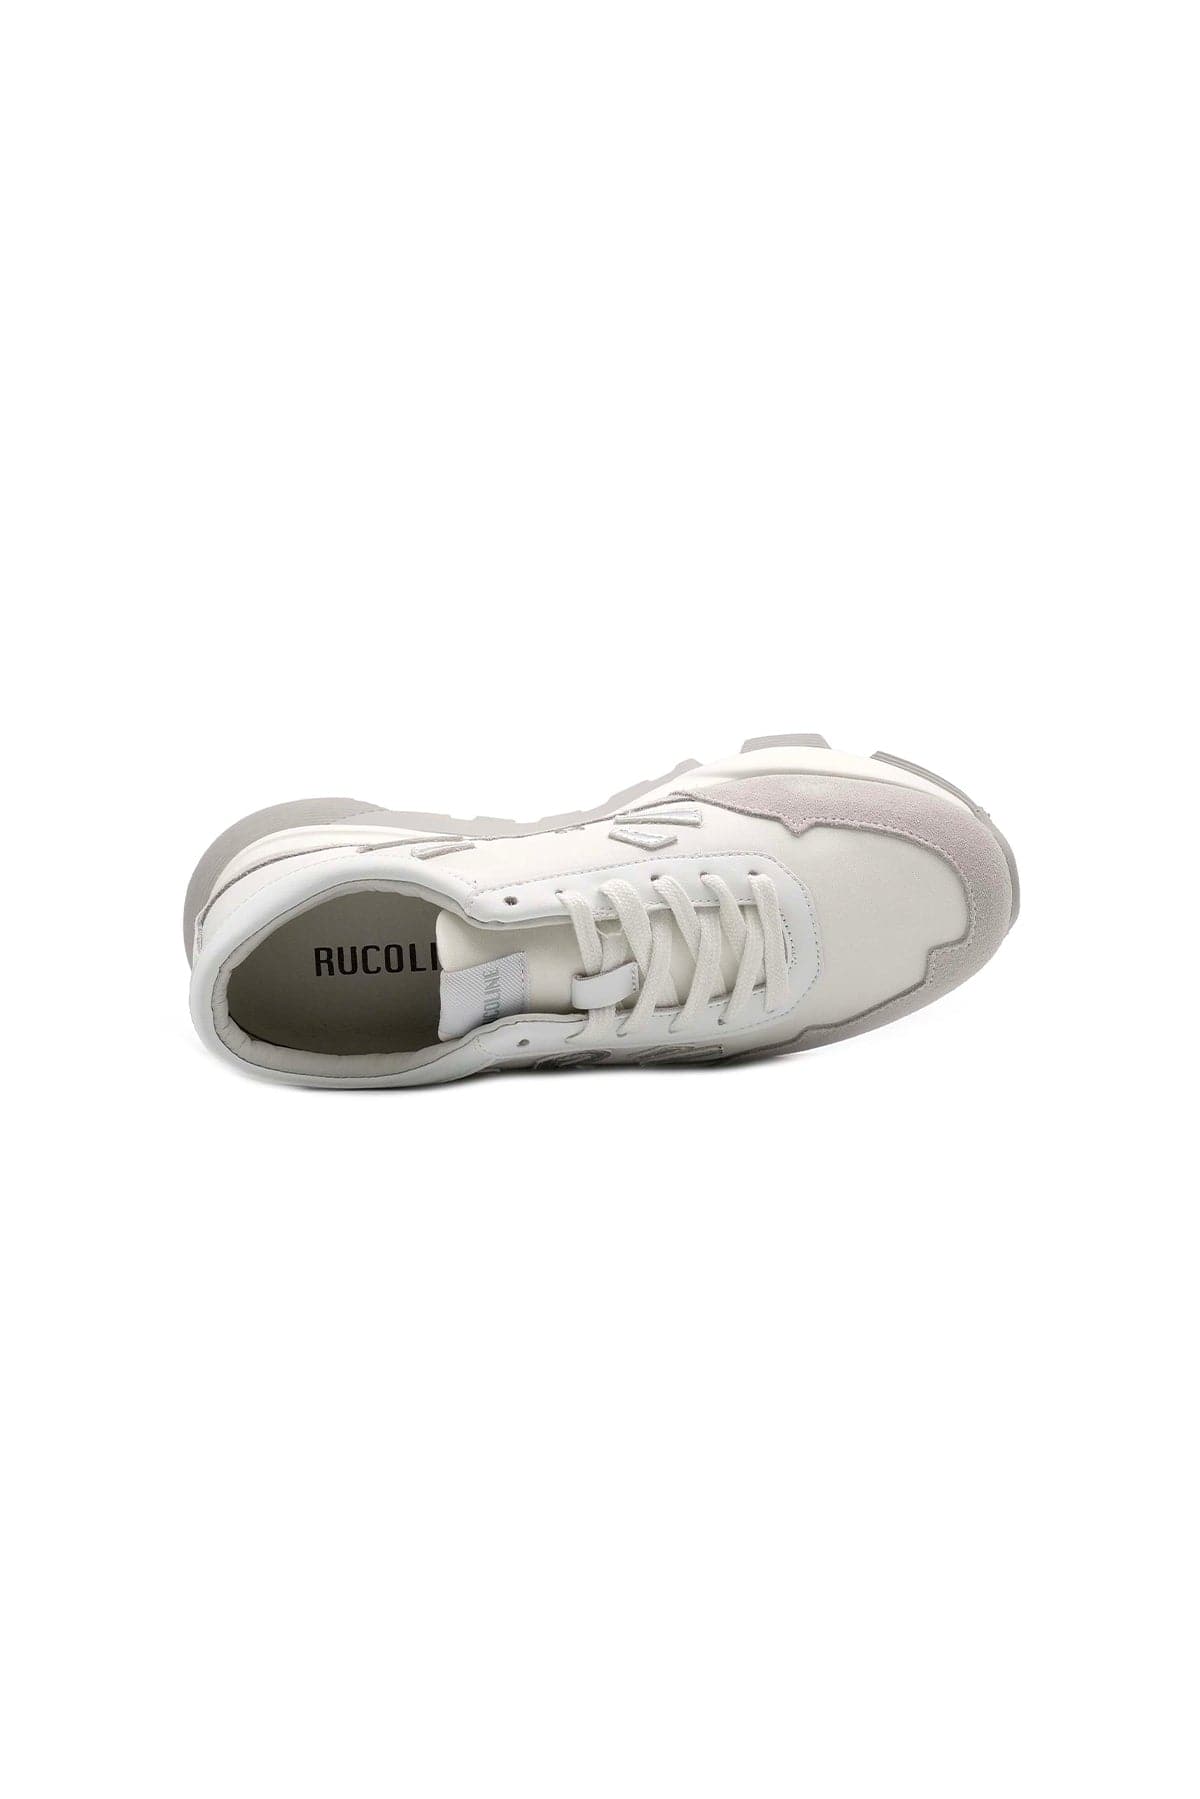 RUCOLINE SNEAKERS Sneaker R-Evolver 4437 Soft Bianco Argento Rucoline